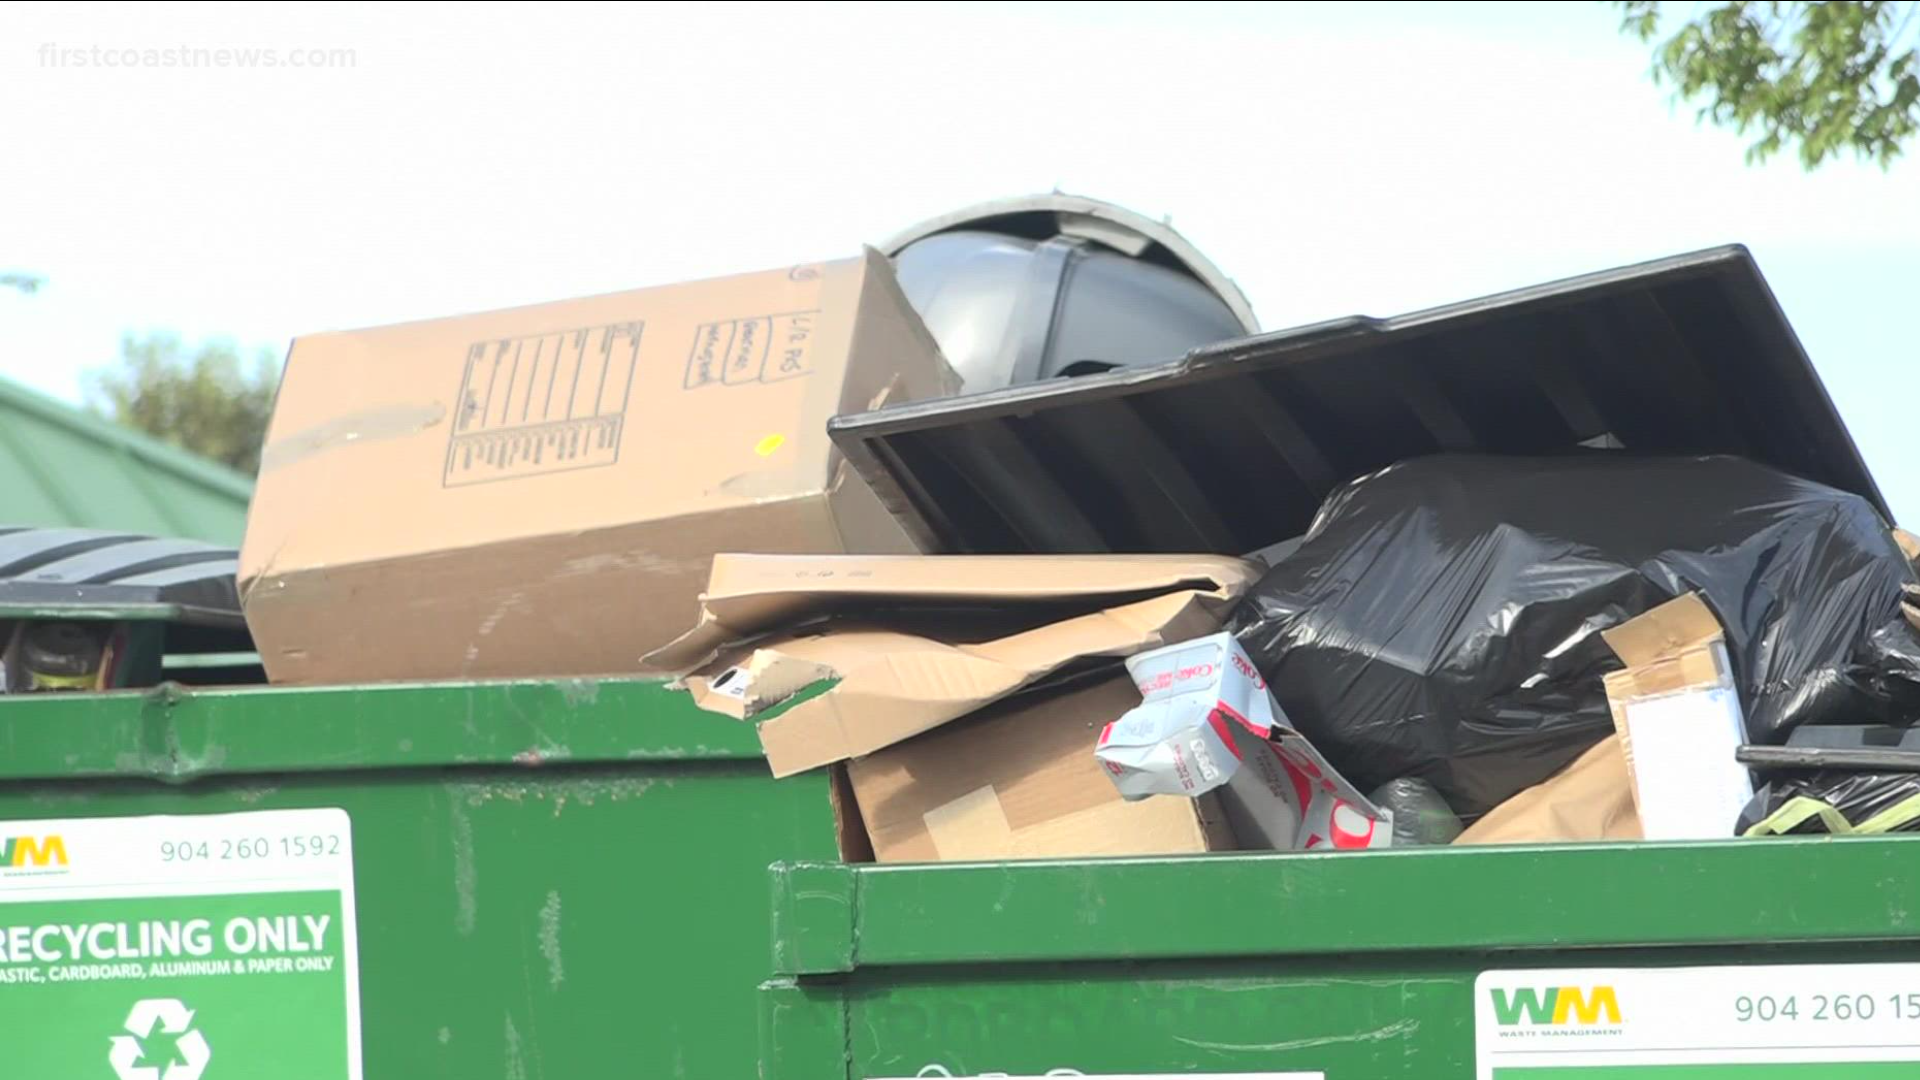 It's day one of a temporary solution to waste collection backlogs across Duval County, but already recycling drop-off sites are overflowing.